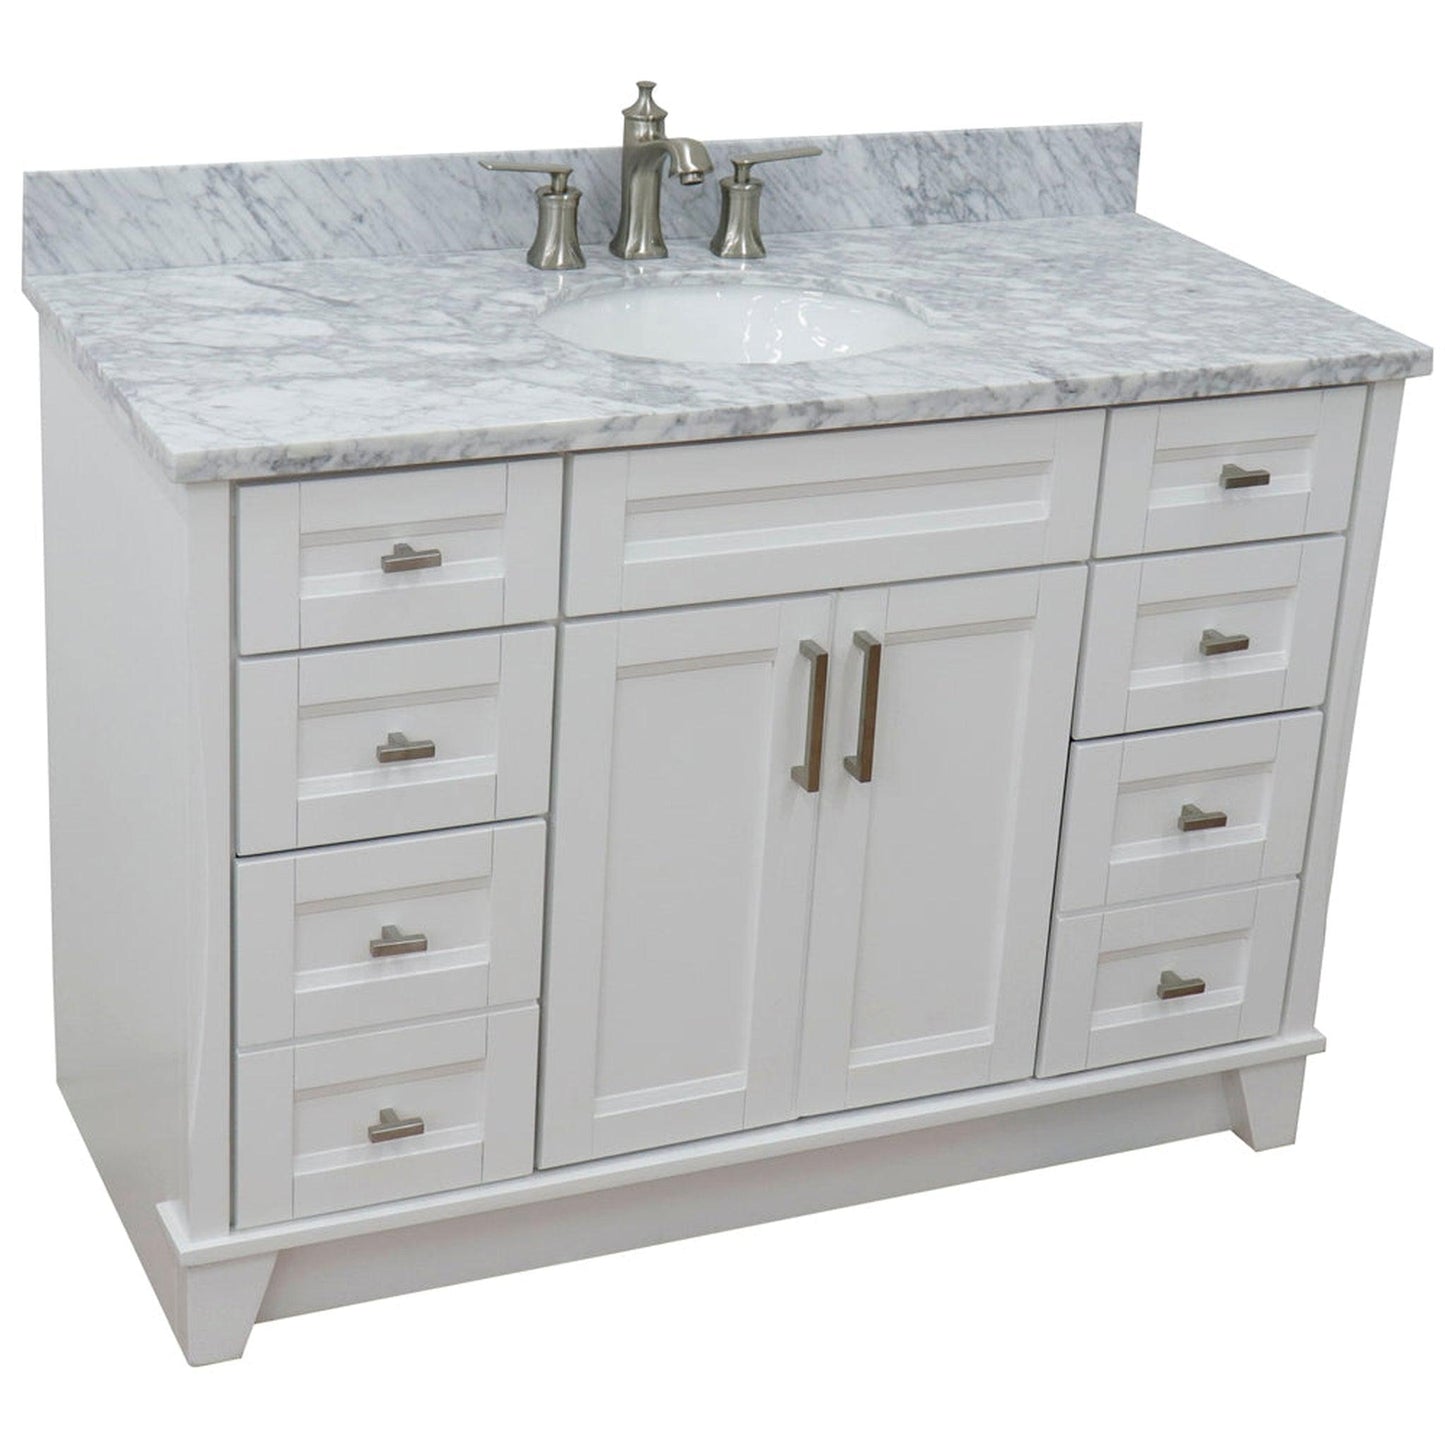 Bellaterra Home Terni 49" 2-Door 6-Drawer White Freestanding Vanity Set With Ceramic Undermount Oval Sink and White Carrara Marble Top